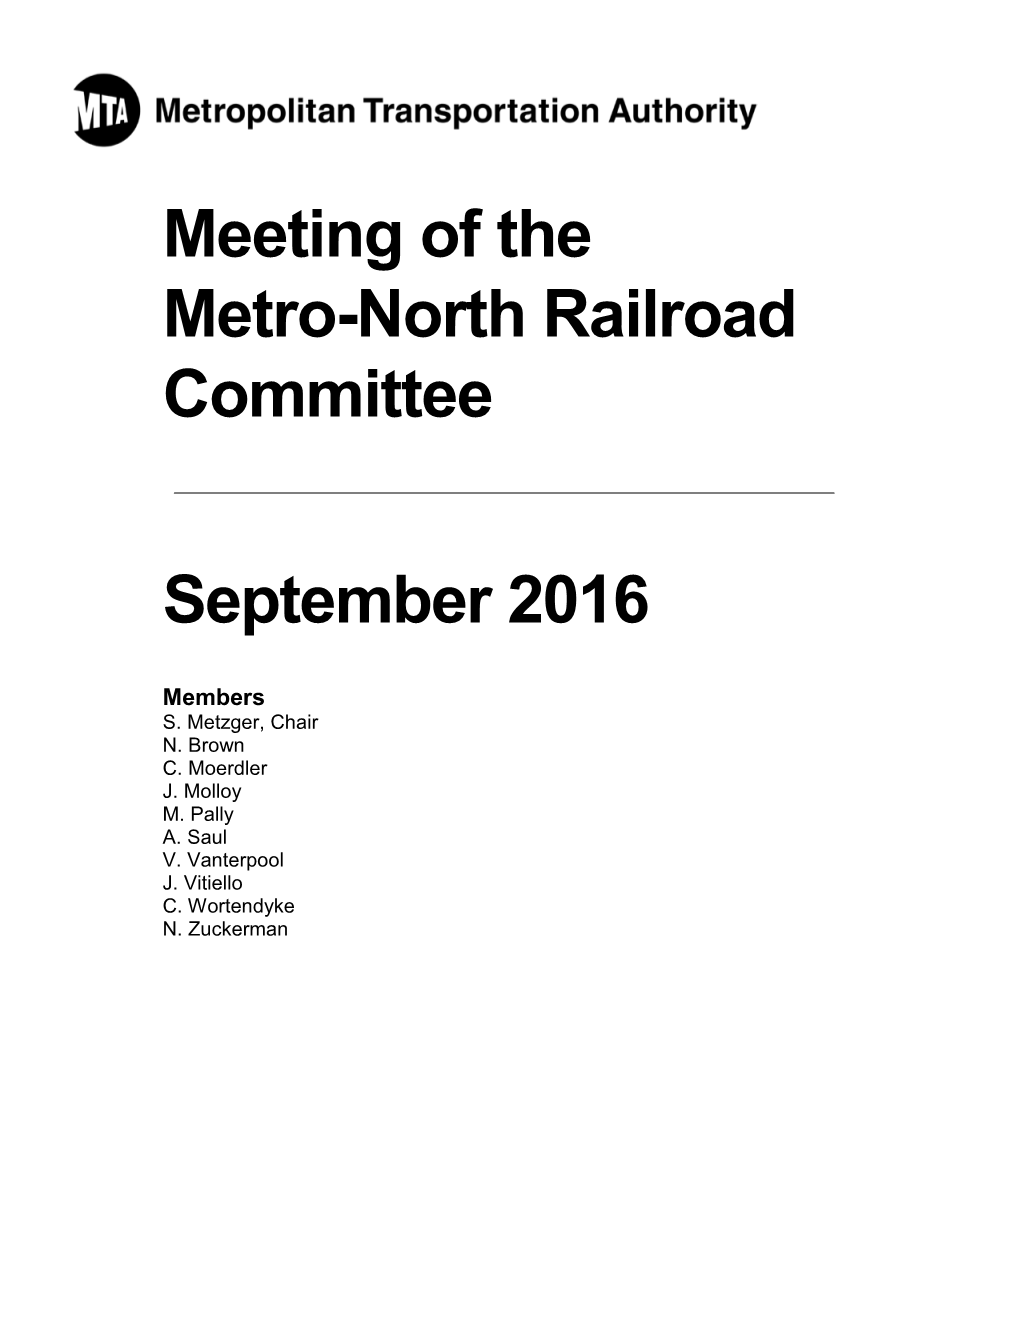 Meeting of the Metro-North Railroad Committee September 2016